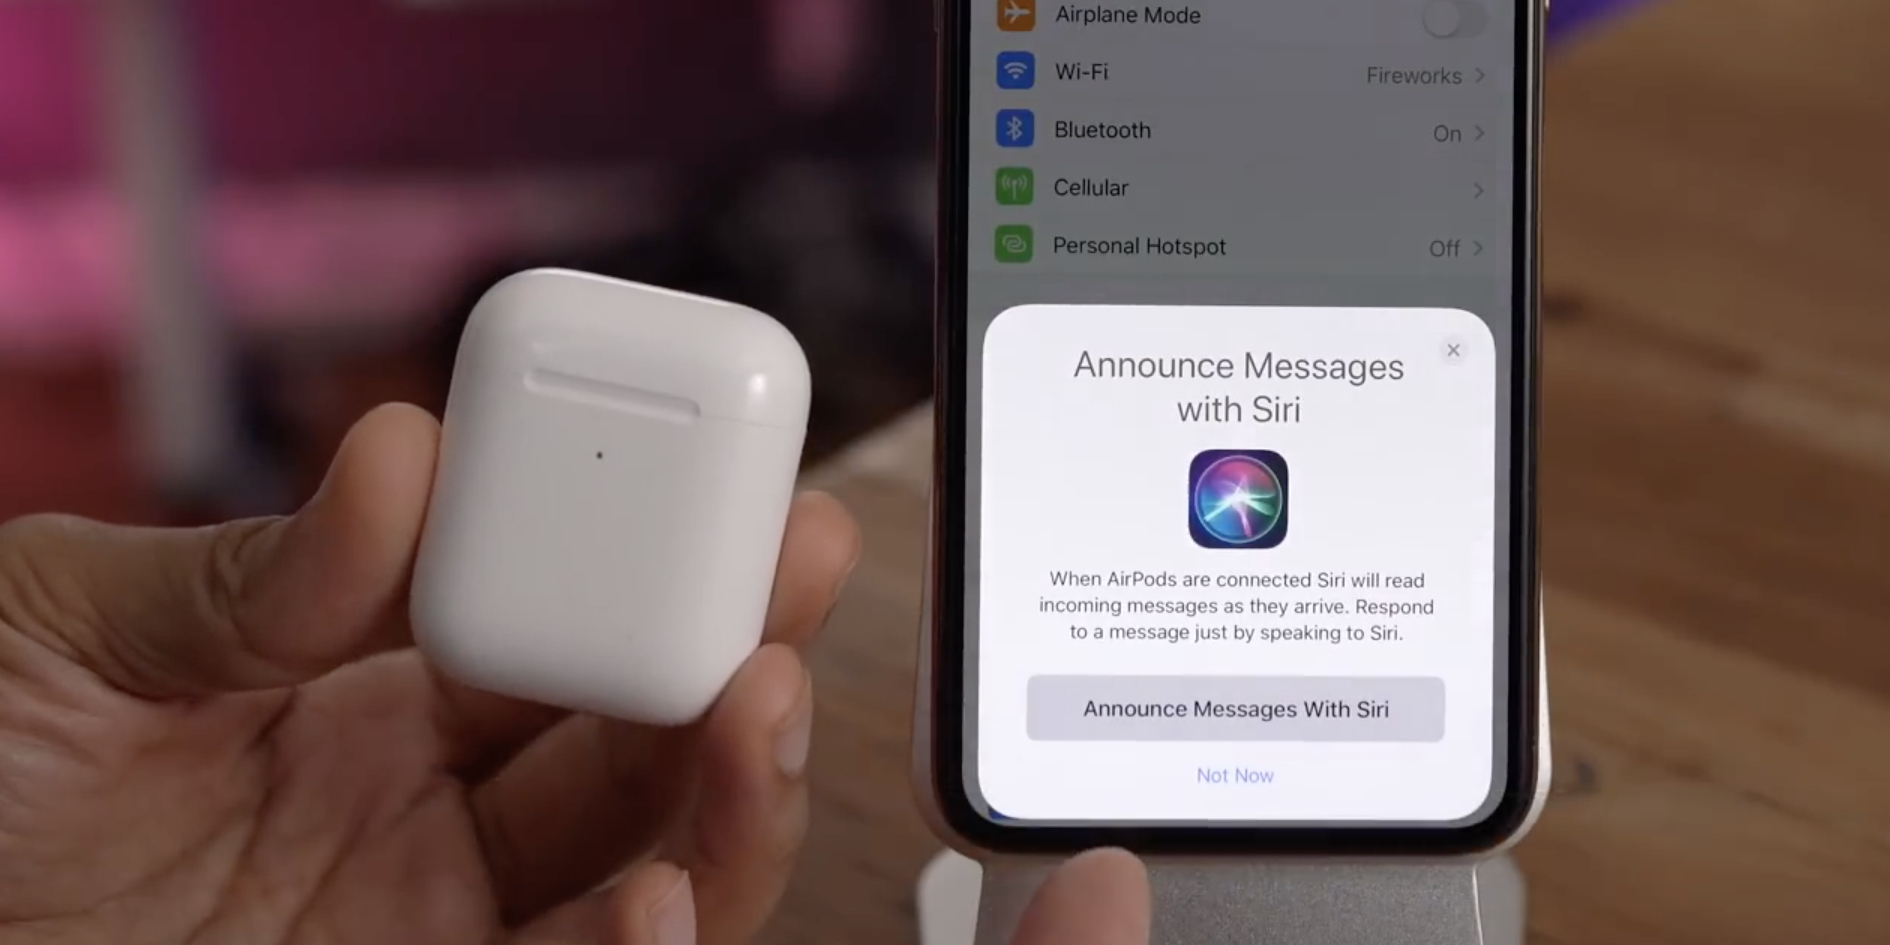 iOS 13 AirPods features like 'Announce 